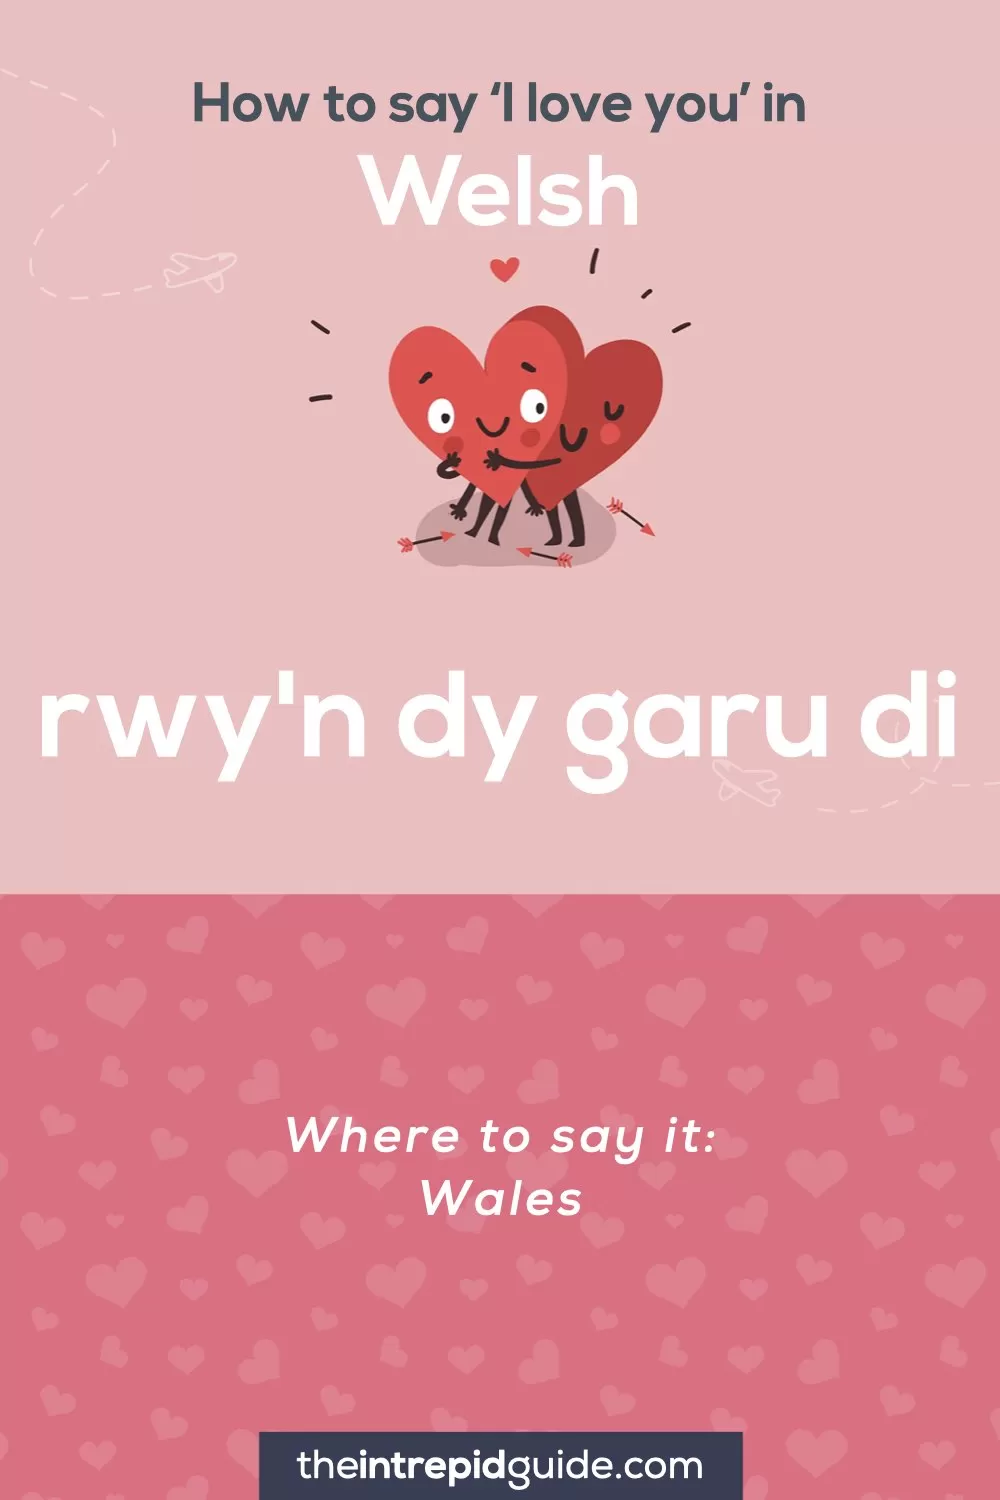 How to say I love you in different languages - Welsh - rwy'n dy garu di